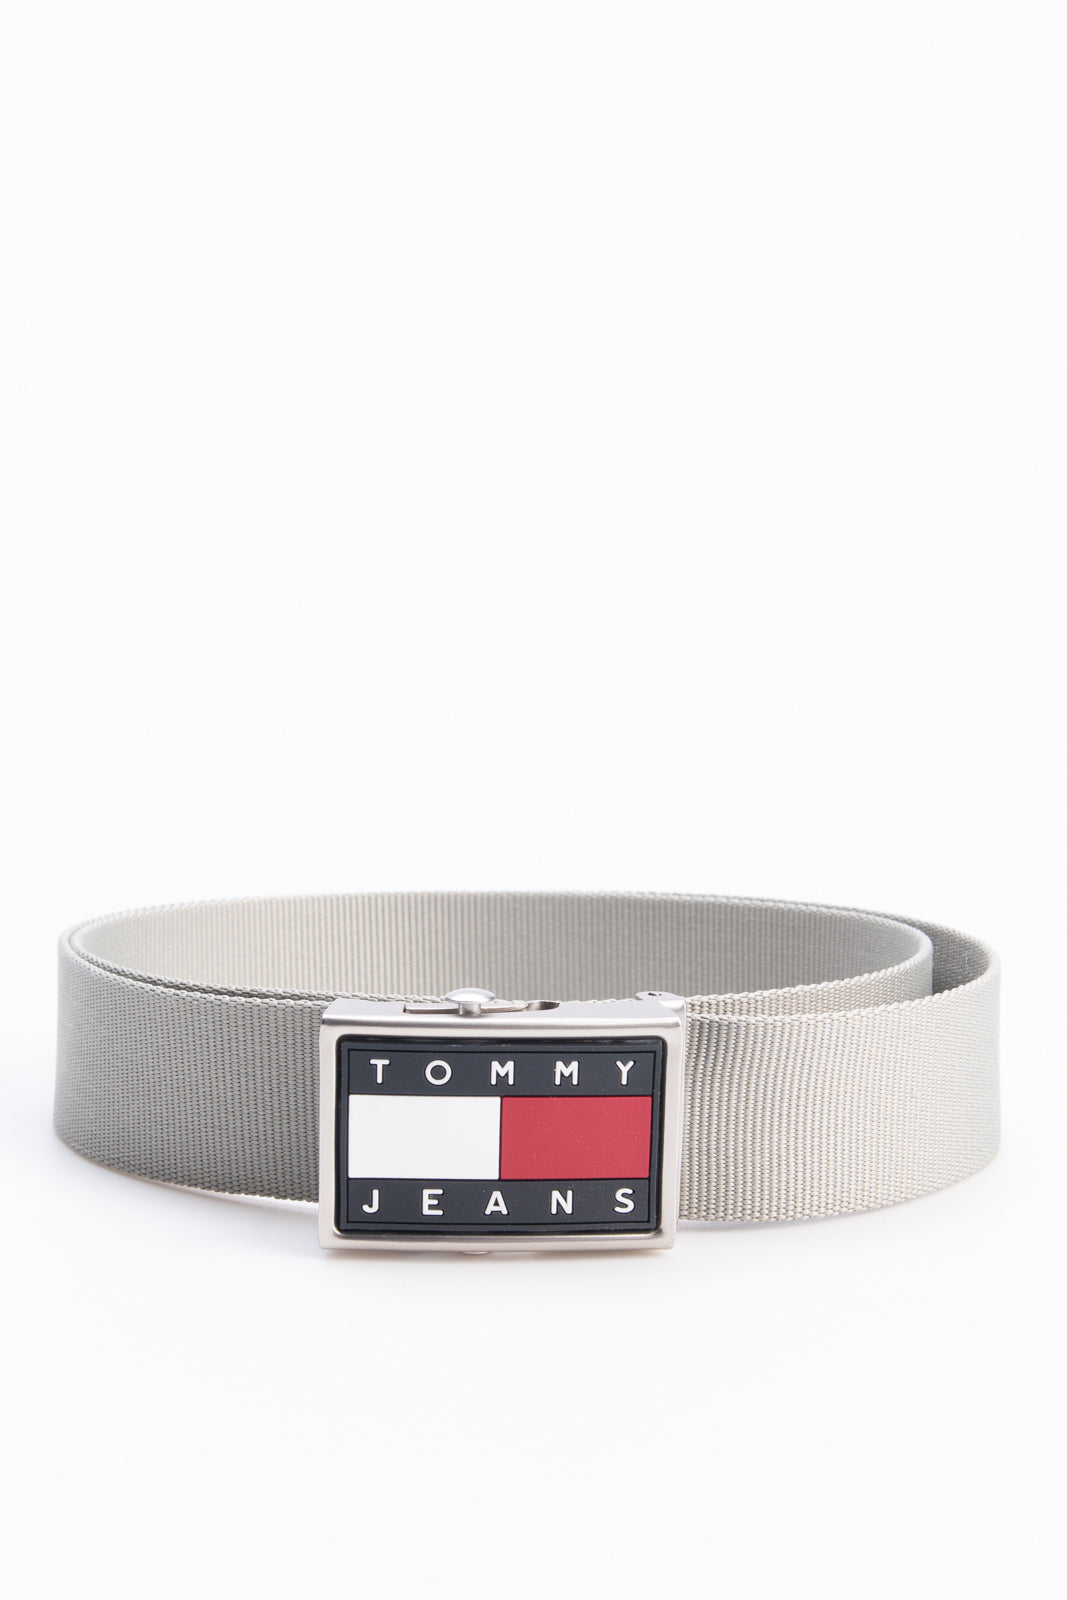 TOMMY JEANS Woven Web Belt Size 95/38 Wide Adjustable Logo Autogrip Buckle gallery main photo